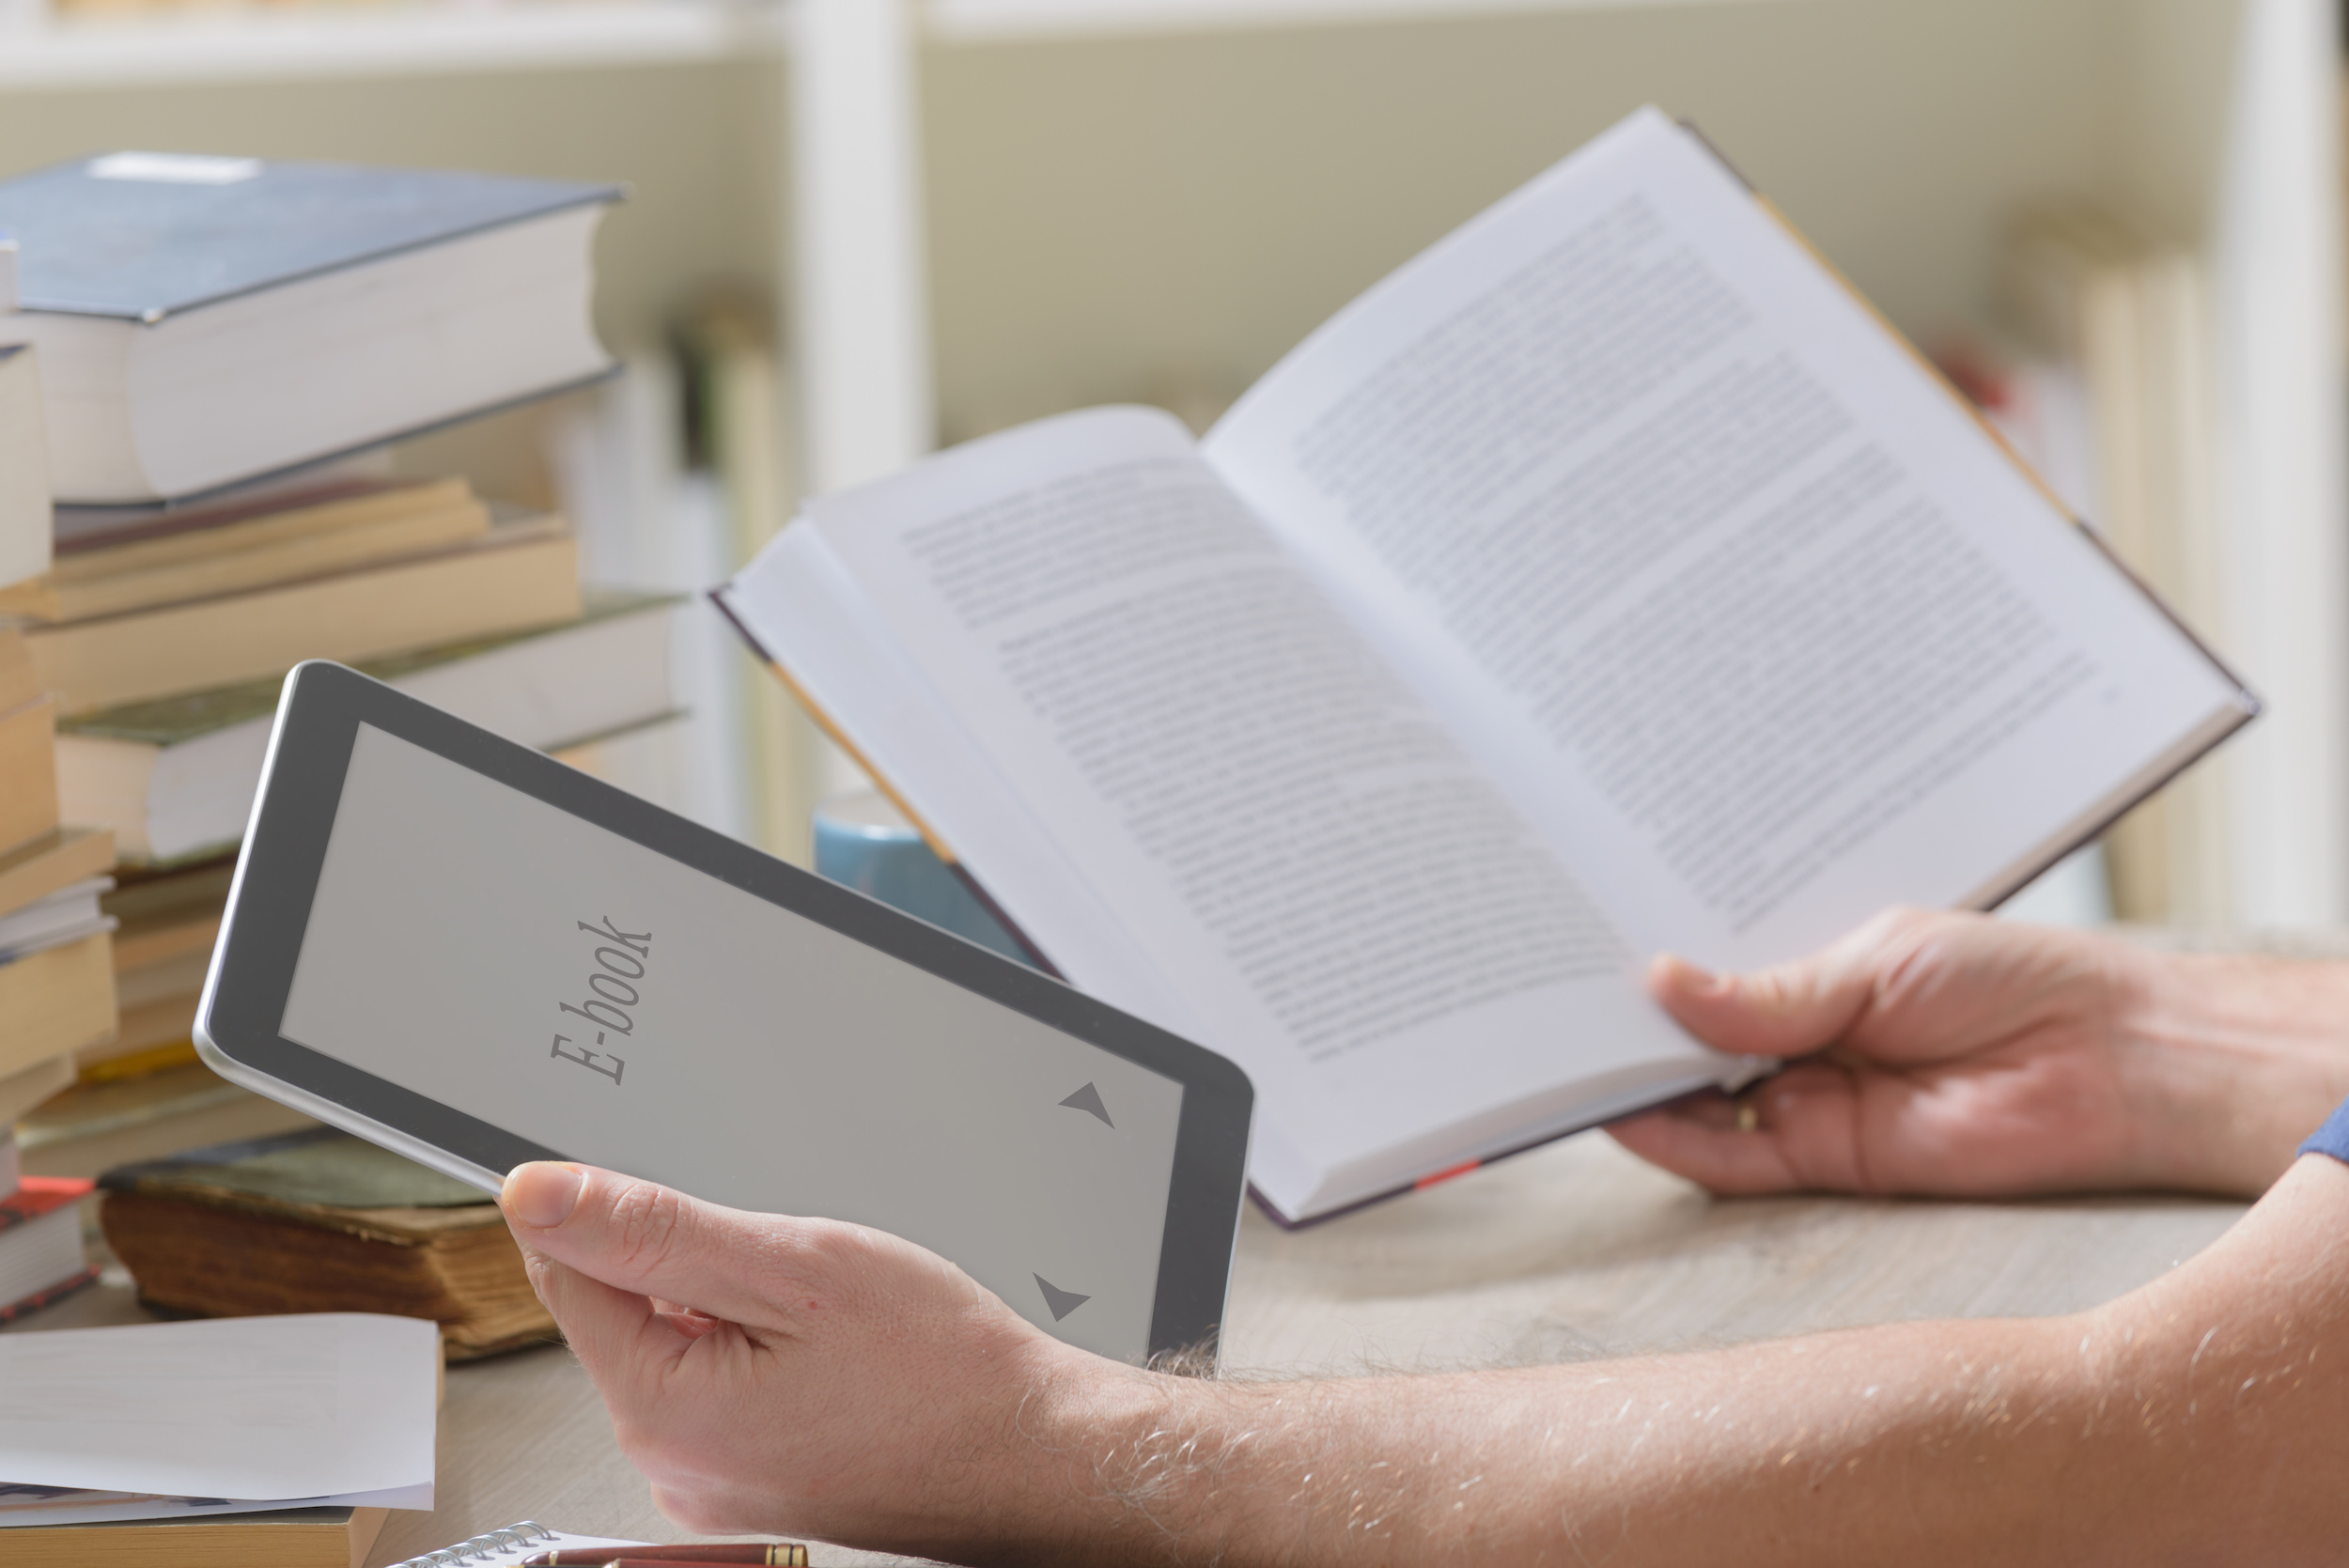 Best Business Books for Freelancers